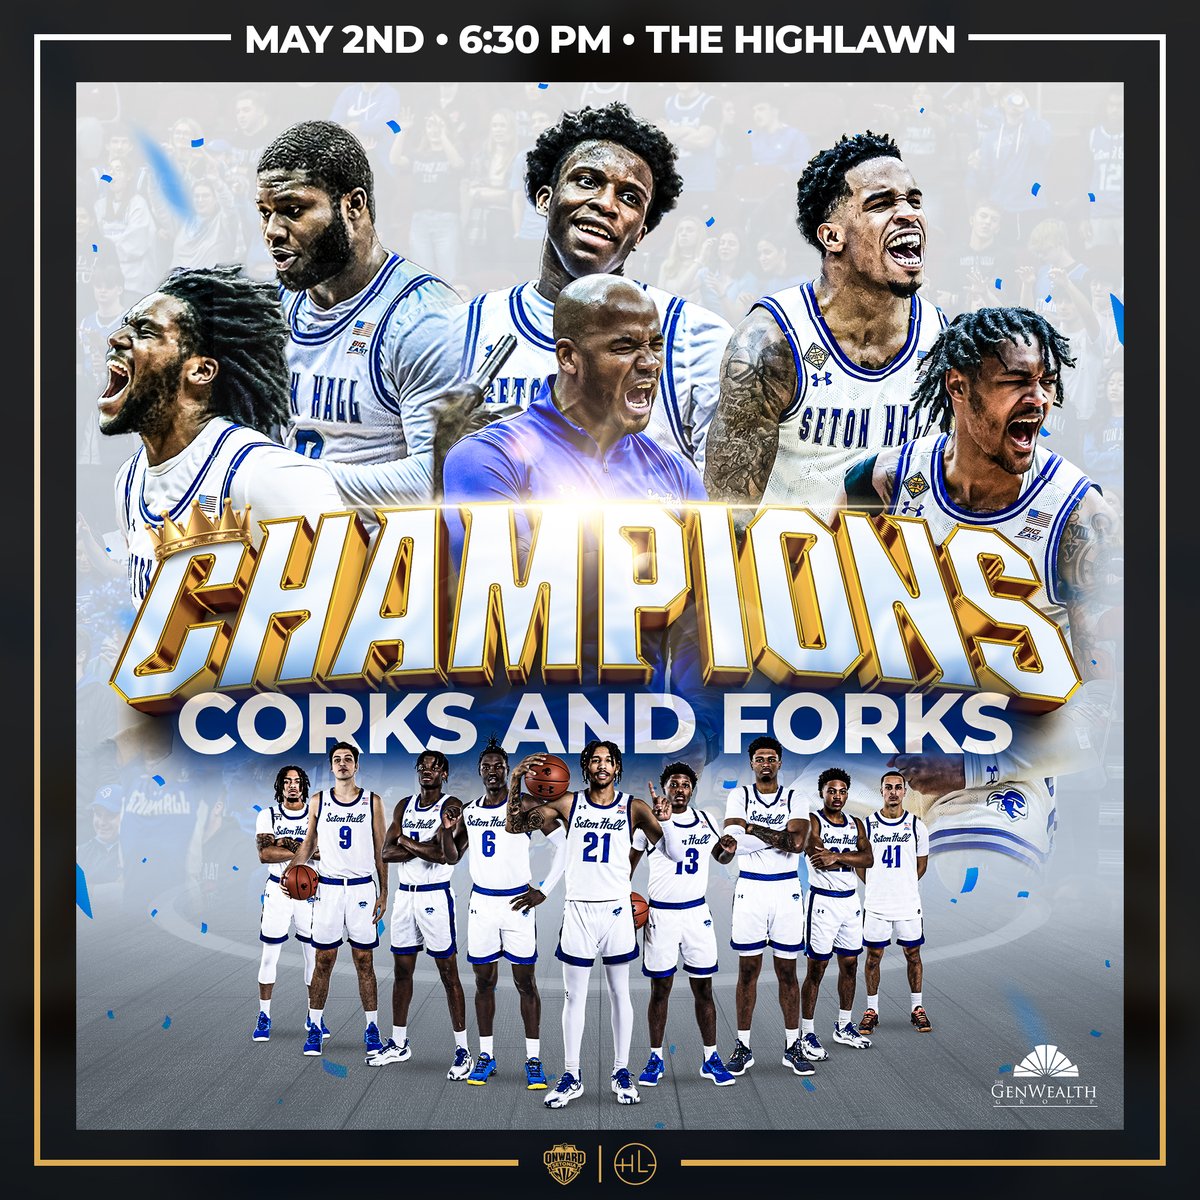 Join us on May 2nd for the ninth annual Corks and Forks event! See and take pictures with the NIT Champions trophy! Register using the link below ⬇️

onwardsetonia.com/events/corks-a…

#HALLin🔵⚪️ #SetonHall #NIL #NameImageLikeness #NIT #NCAA #onwardsetonia